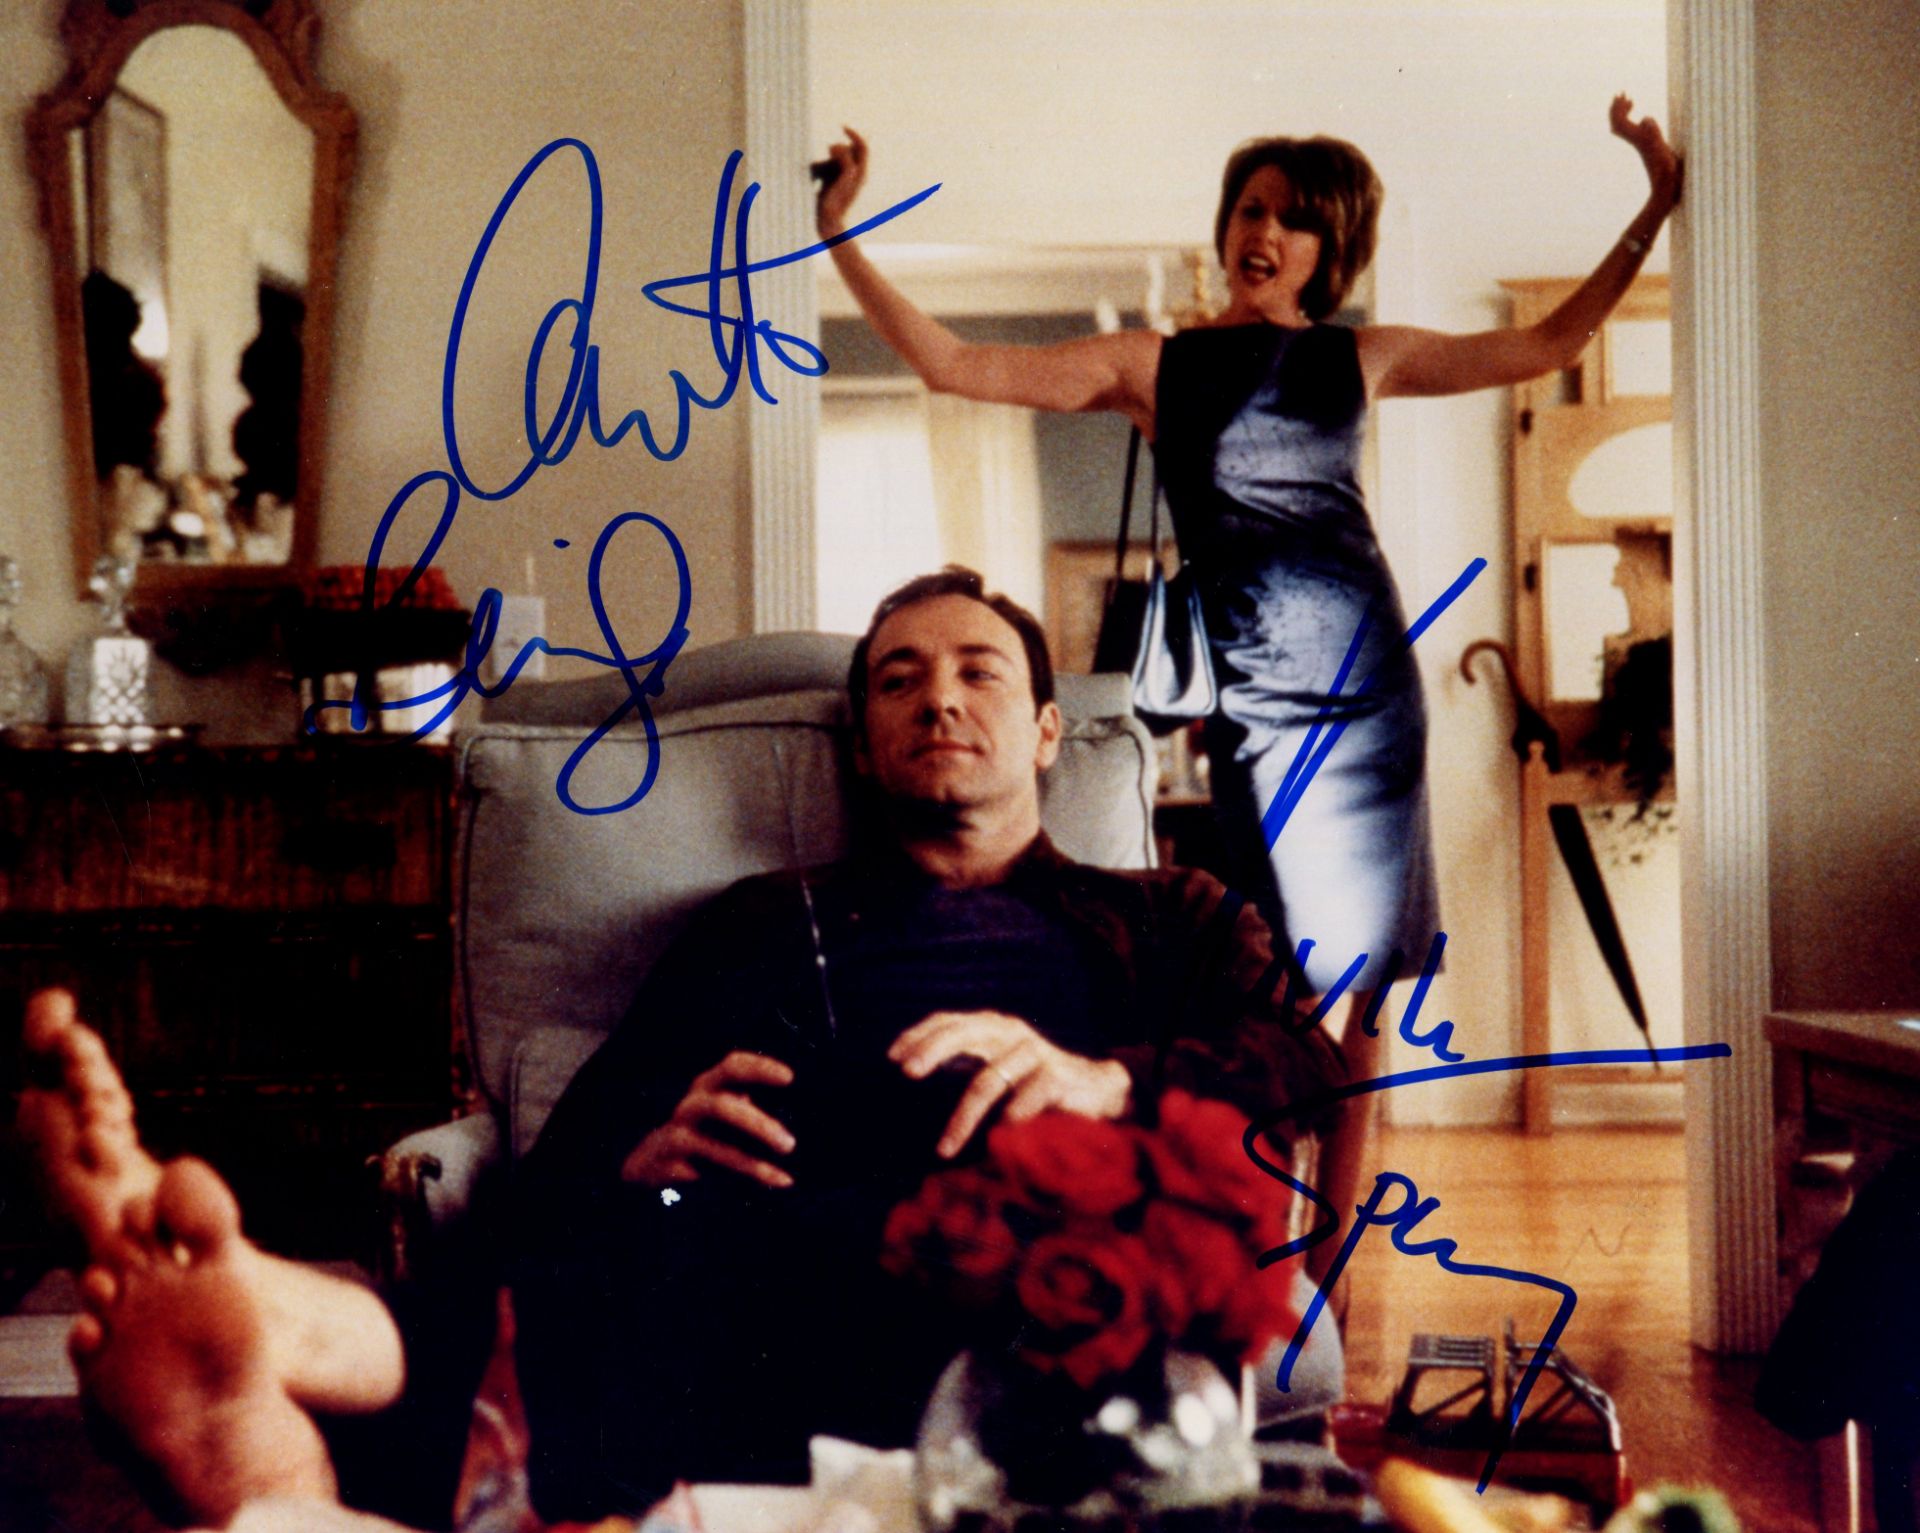 AMERICAN BEAUTY: Signed colour 10 x 8 photograph by both Kevin Spacey (Lester Burnham) and Annette